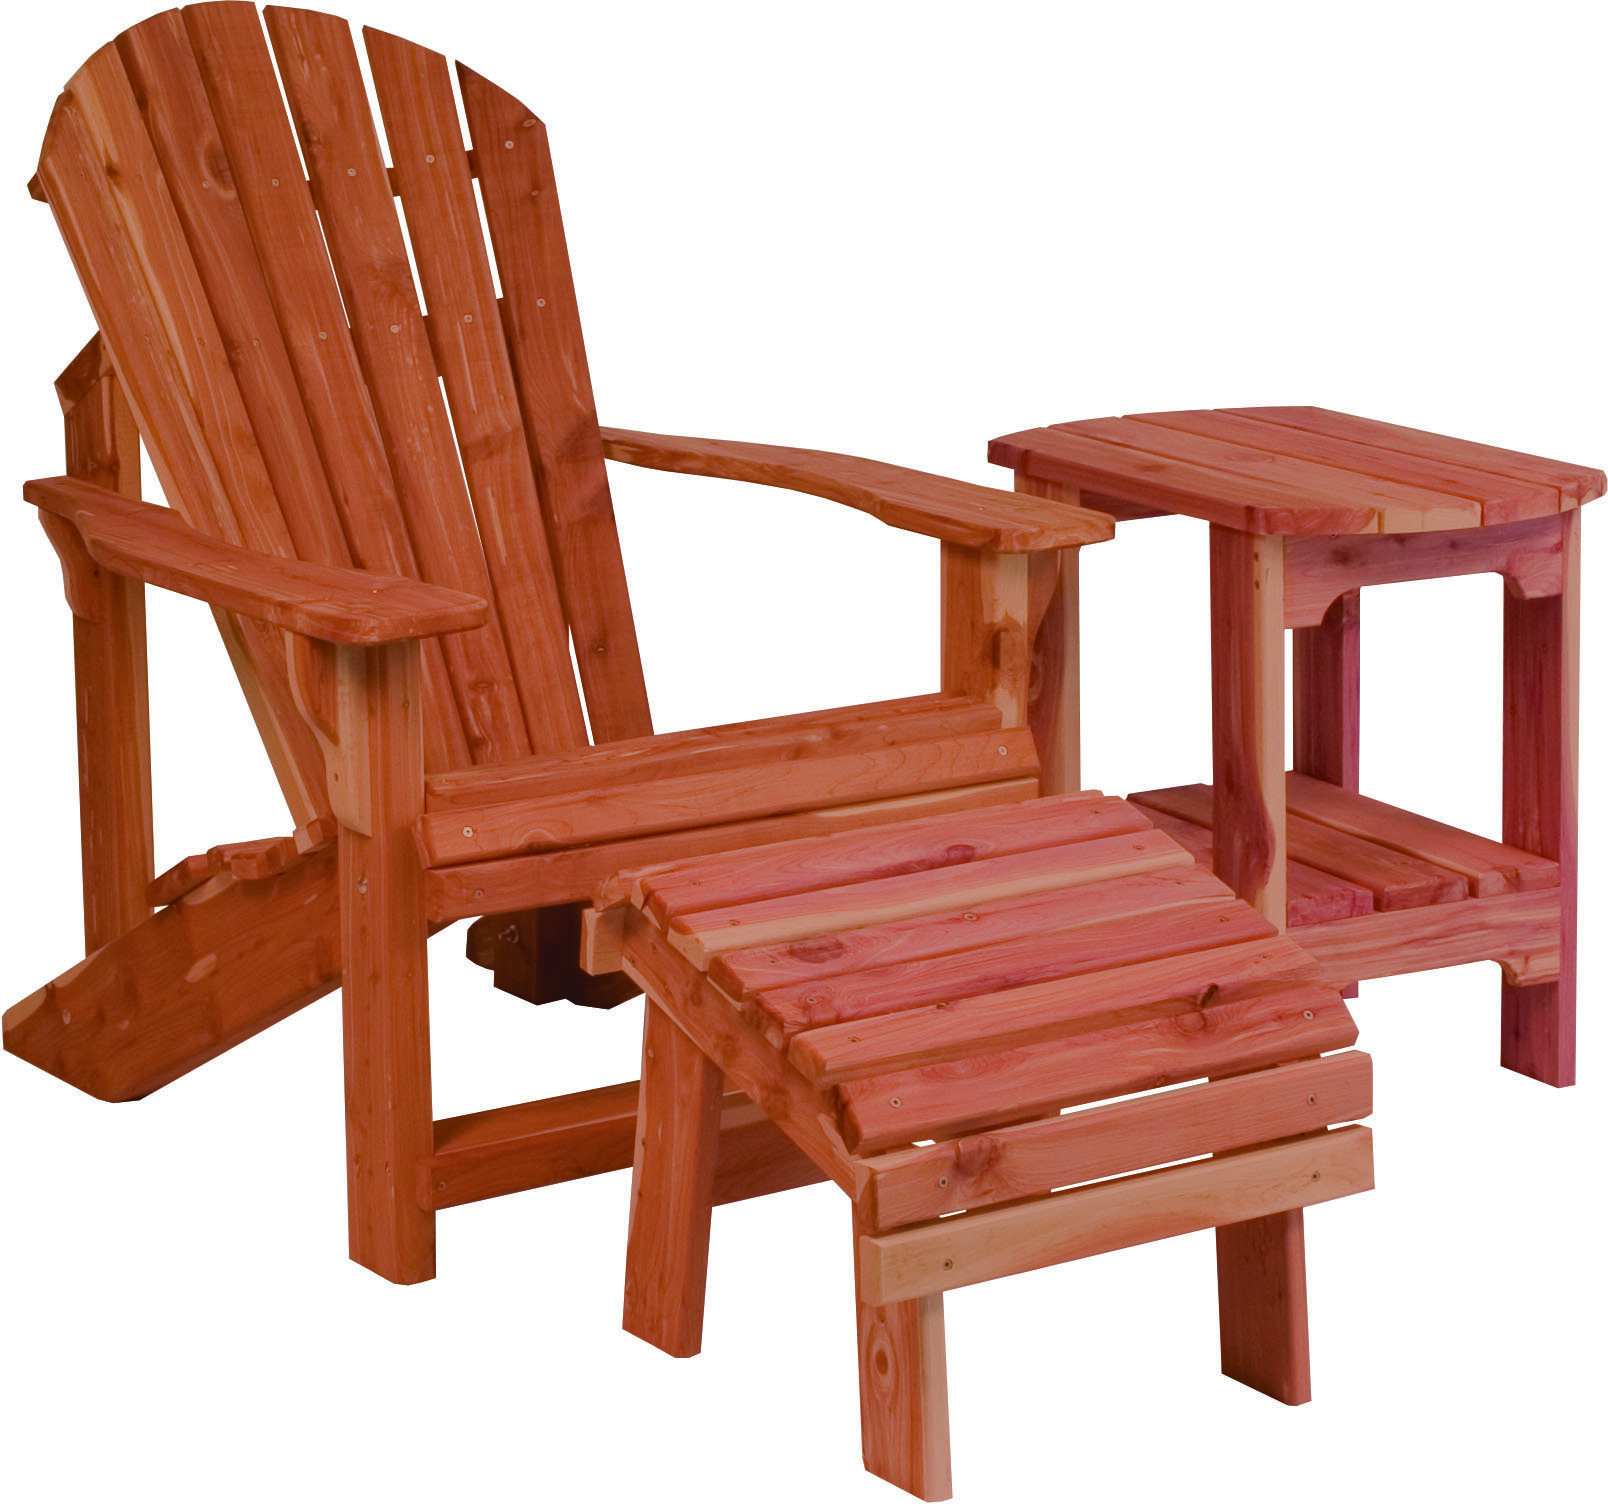 Treated Pine Outdoor Furniture